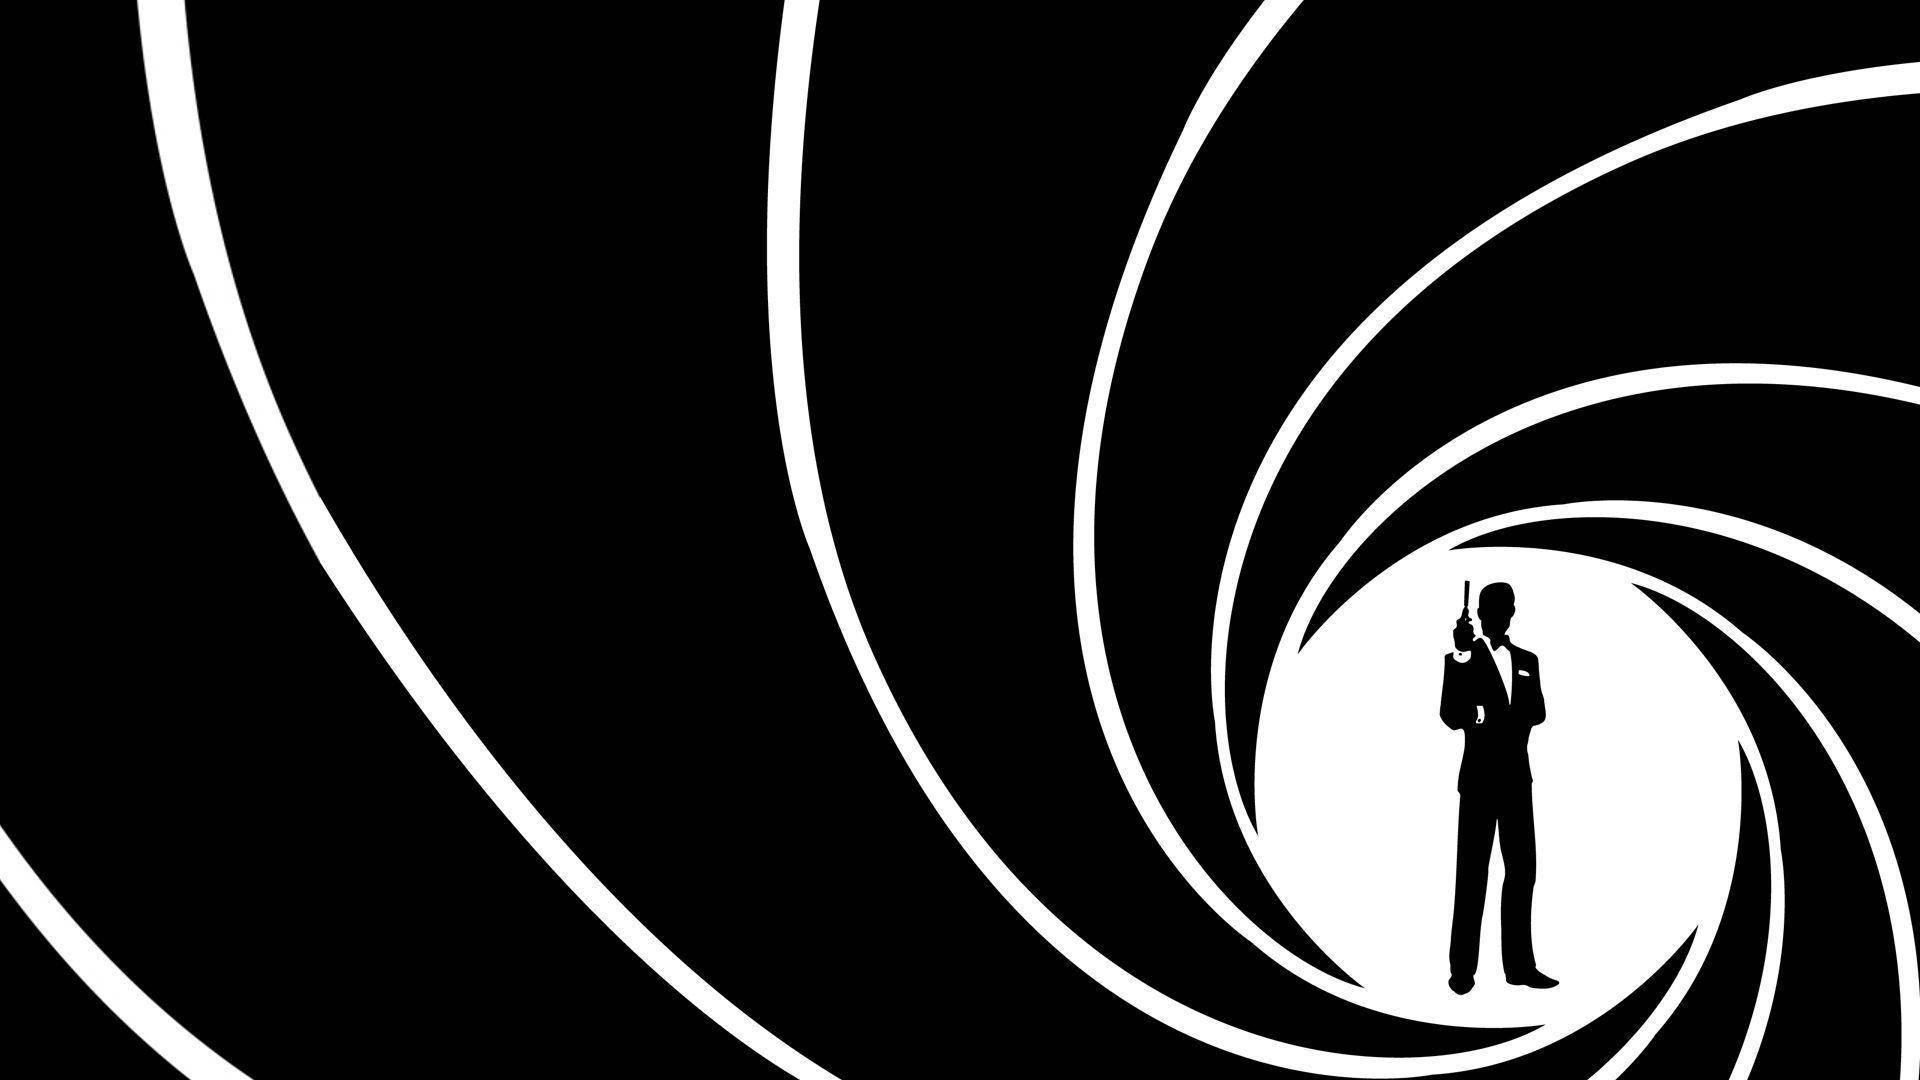 James Bond Black And White Silhouette Background